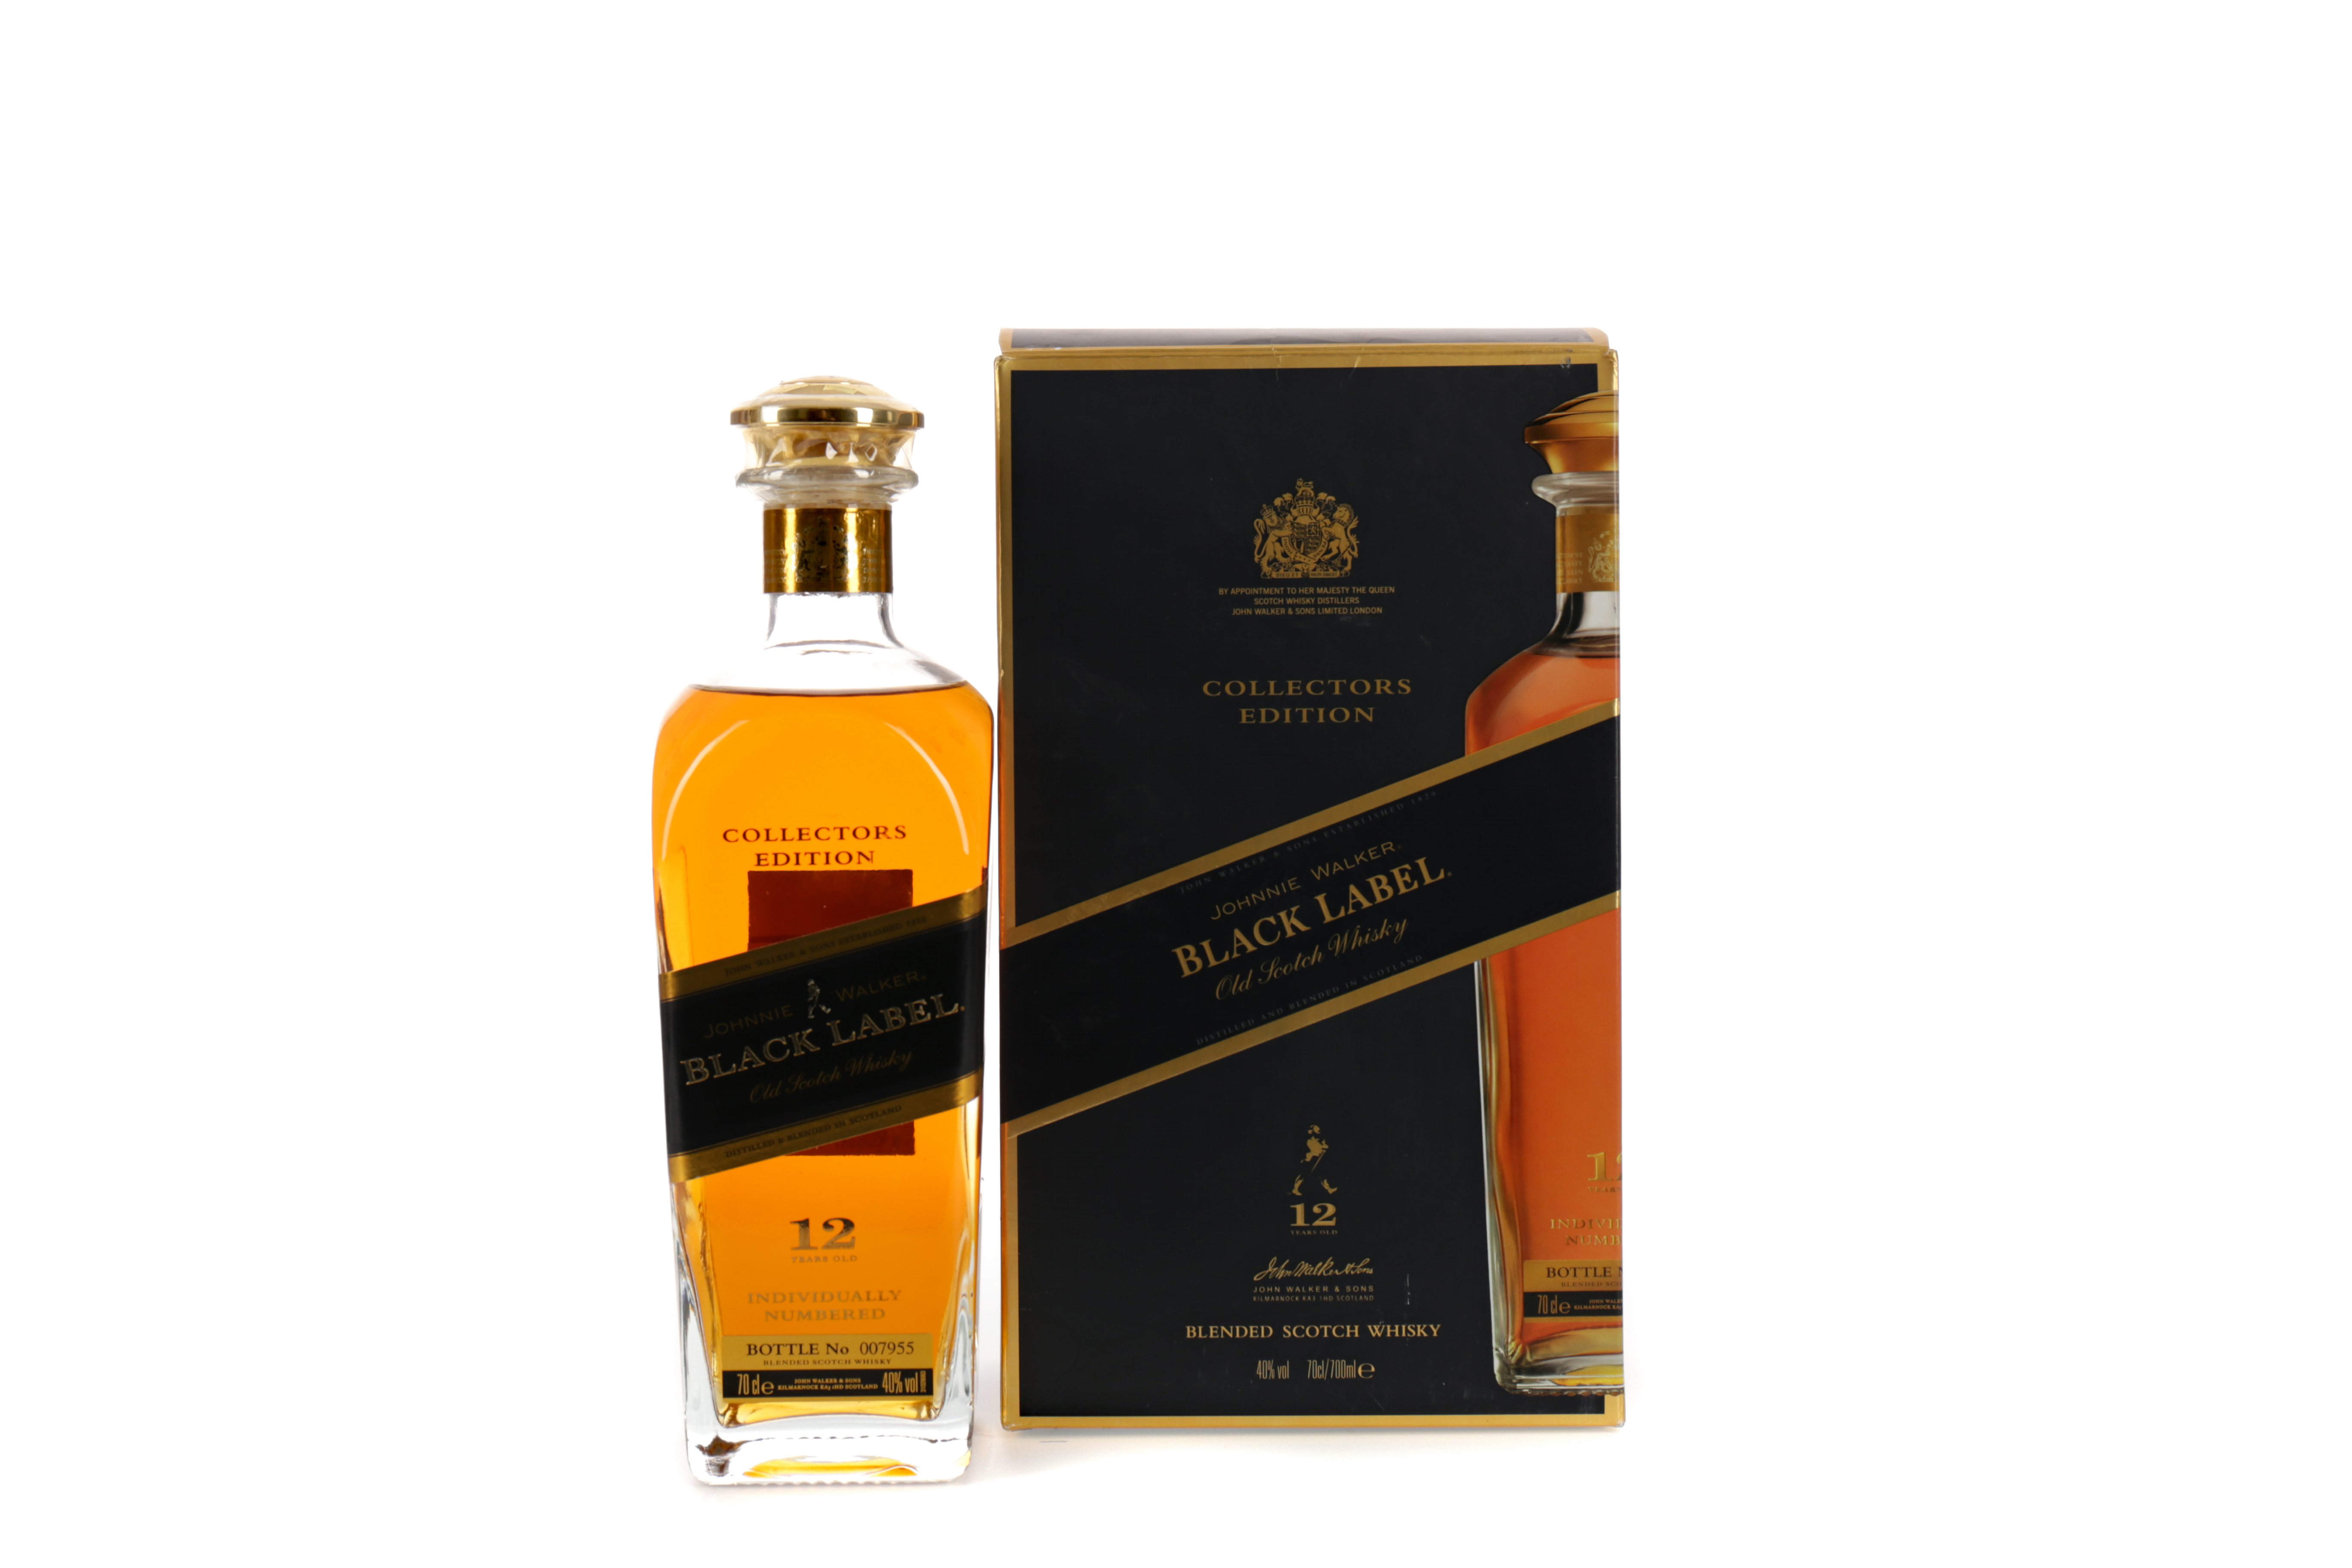 JOHNNIE WALKER BLACK LABEL 12 YEARS OLD COLLECTORS EDITION